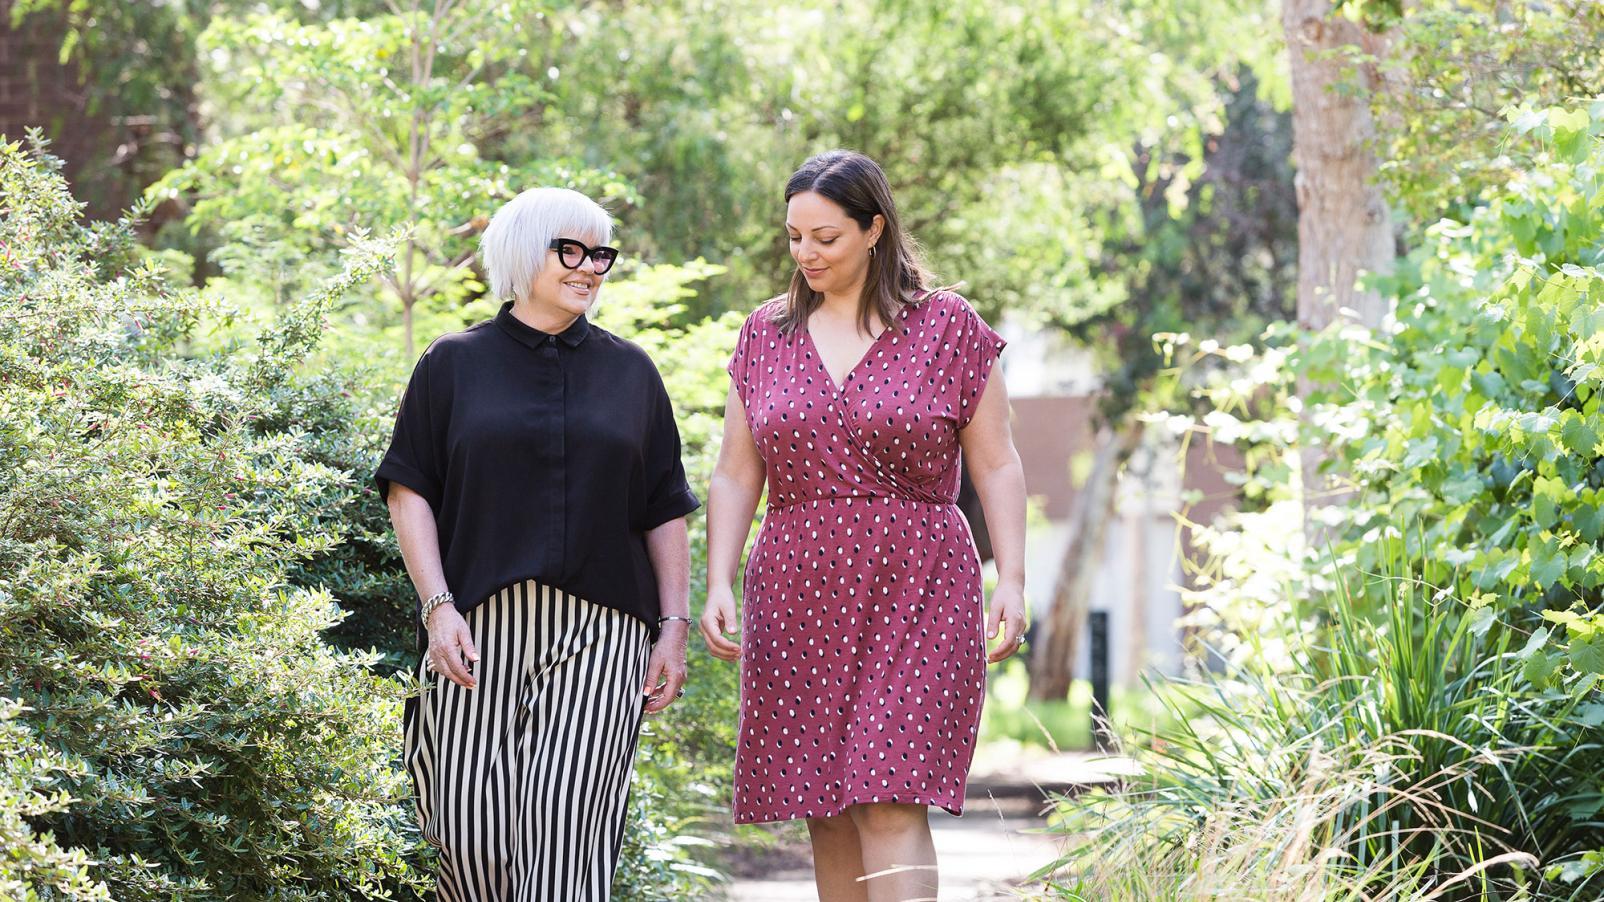 Two females walking in a garden and chatting